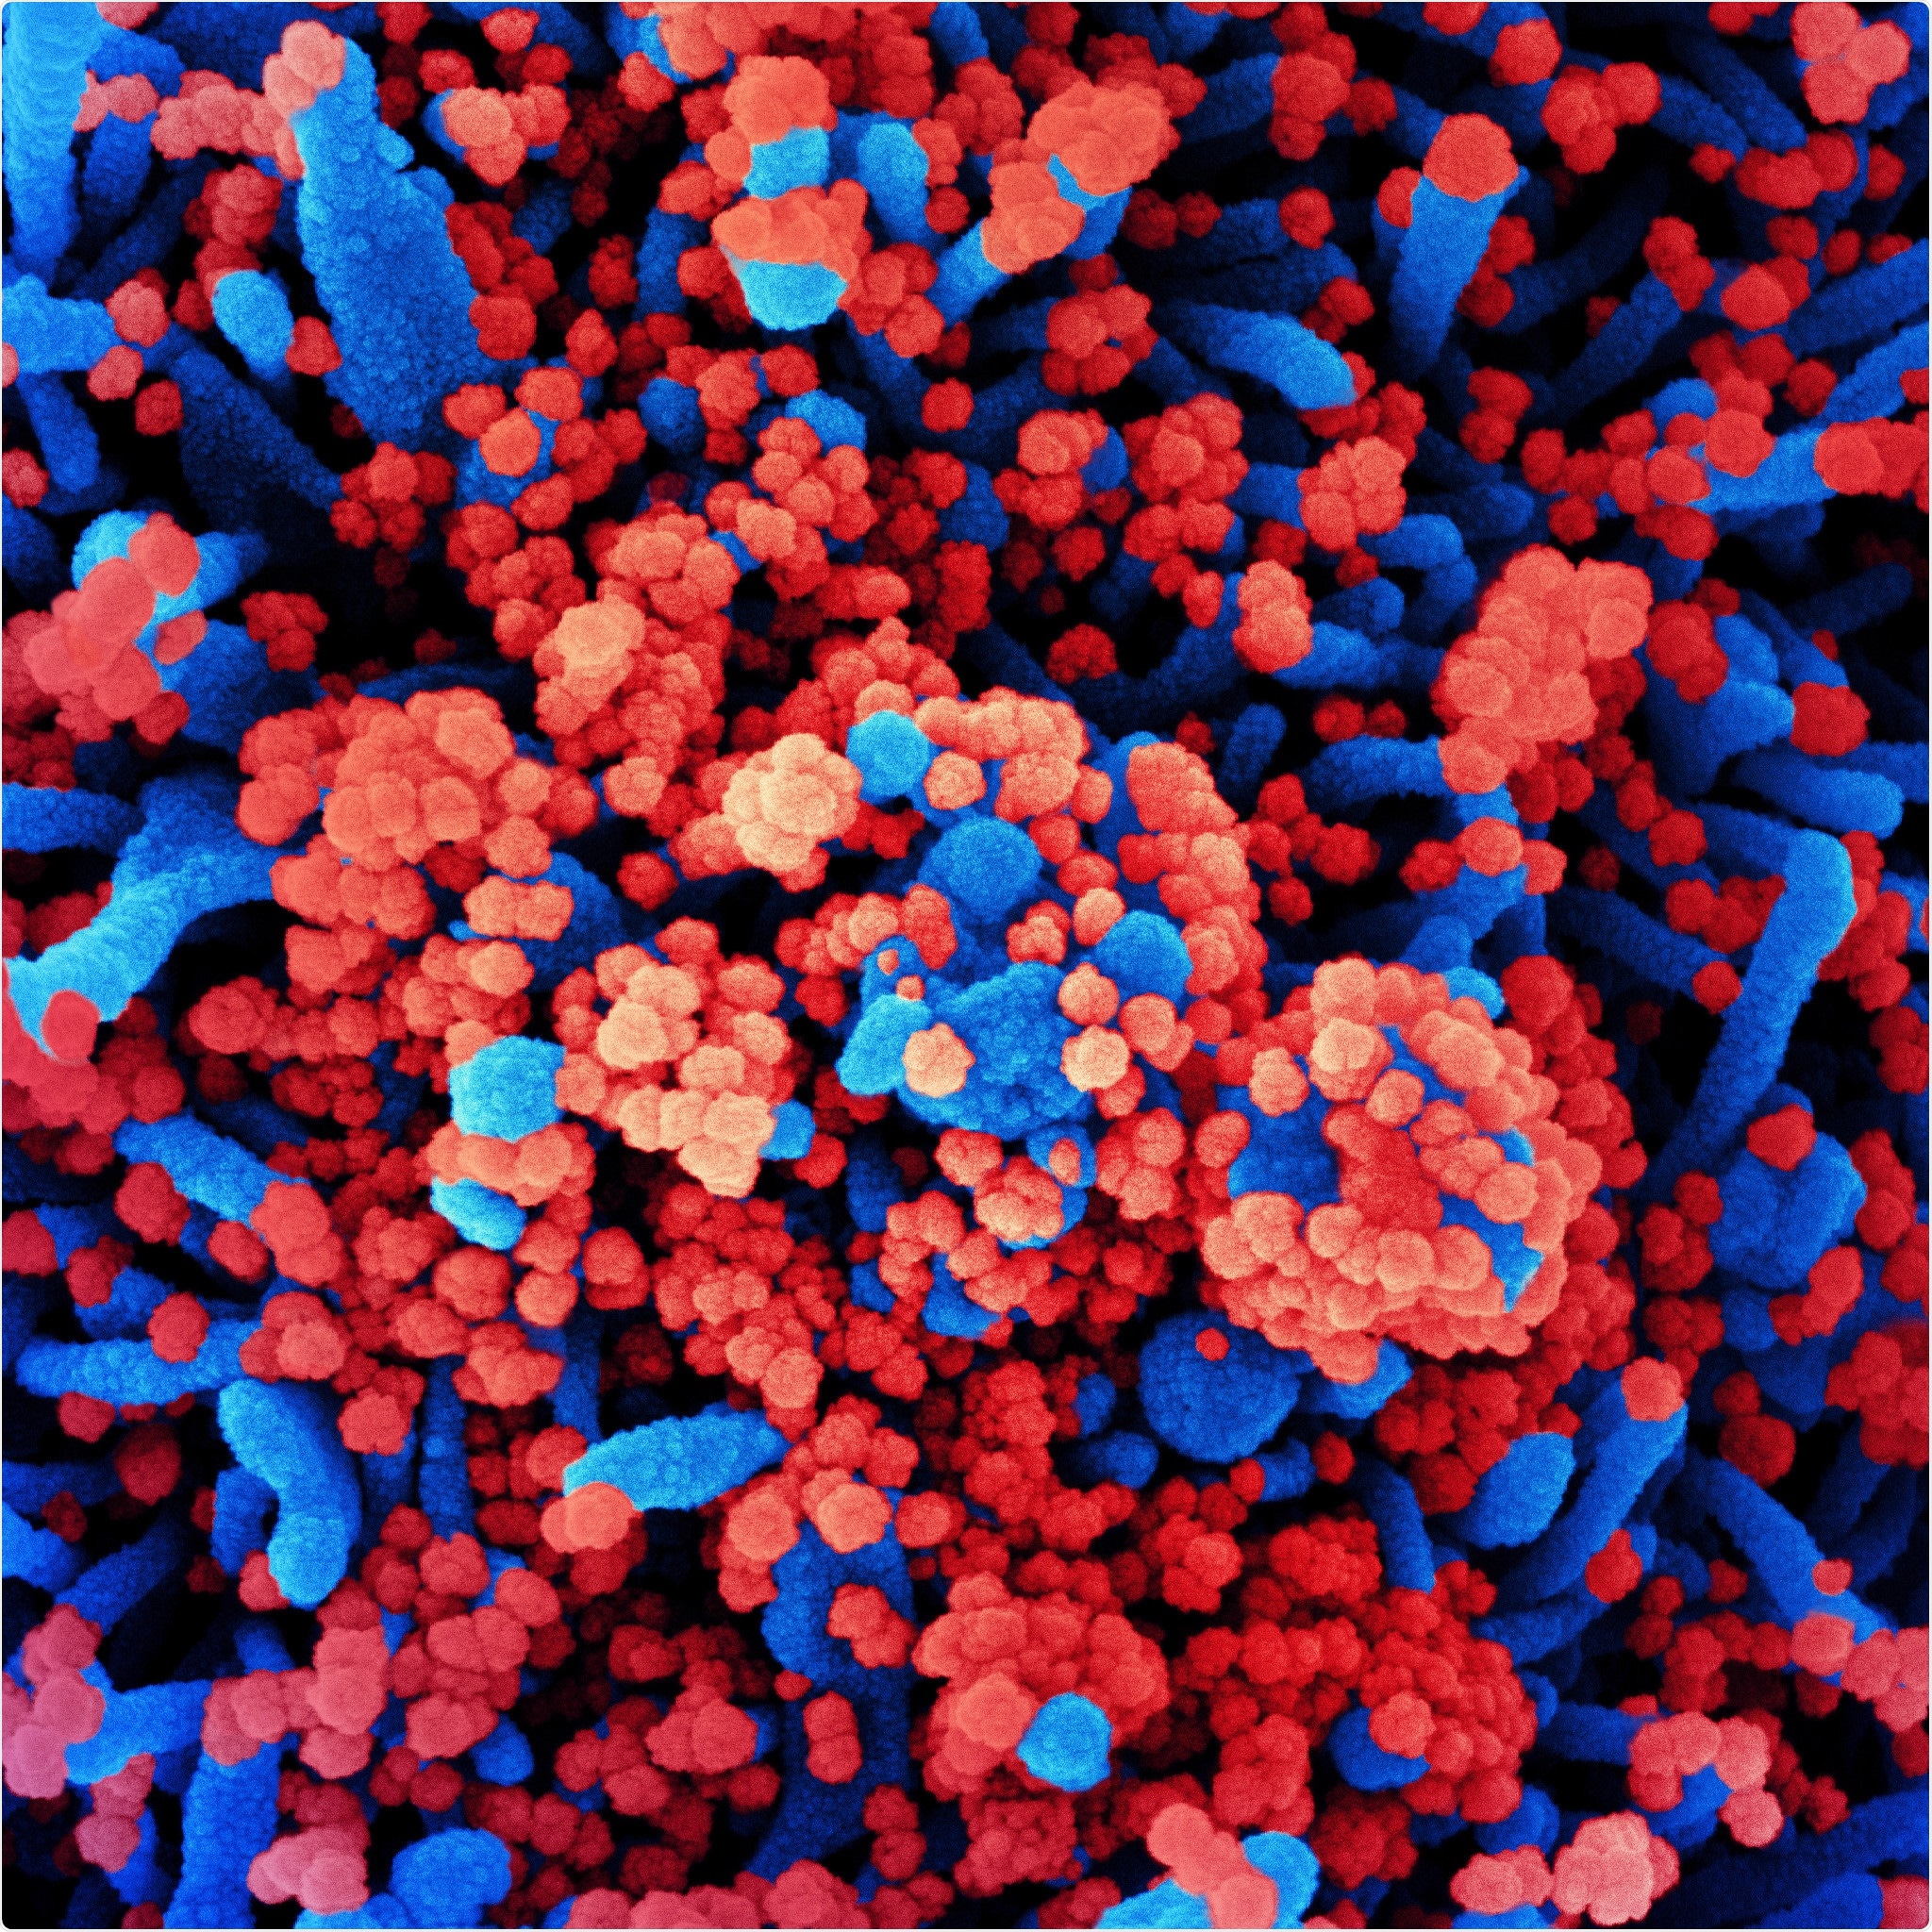 Novel Coronavirus SARS-CoV-2 Colorized scanning electron micrograph of a cell (blue) heavily infected with SARS-CoV-2 virus particles (red), isolated from a patient sample. Image captured at the NIAID Integrated Research Facility (IRF) in Fort Detrick, Maryland. Credit: NIAID